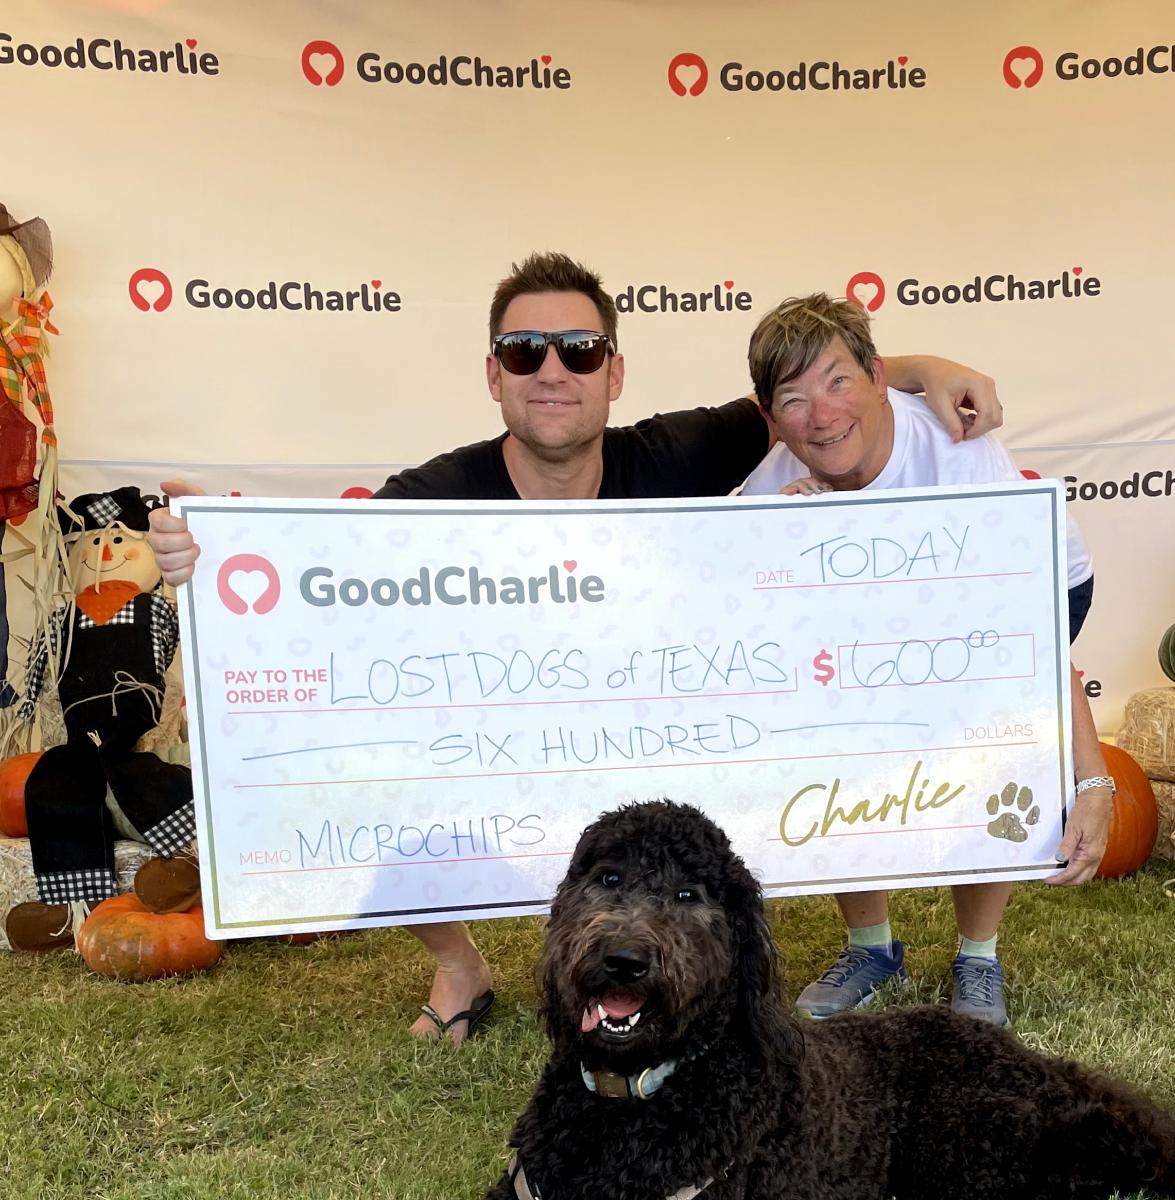 Daryl, cofounder of GoodCharlie, presenting a $600 cheque to Marilyn Litt, director of Lost Dogs of Texas. Charlie is sitting on the grass in front of them.